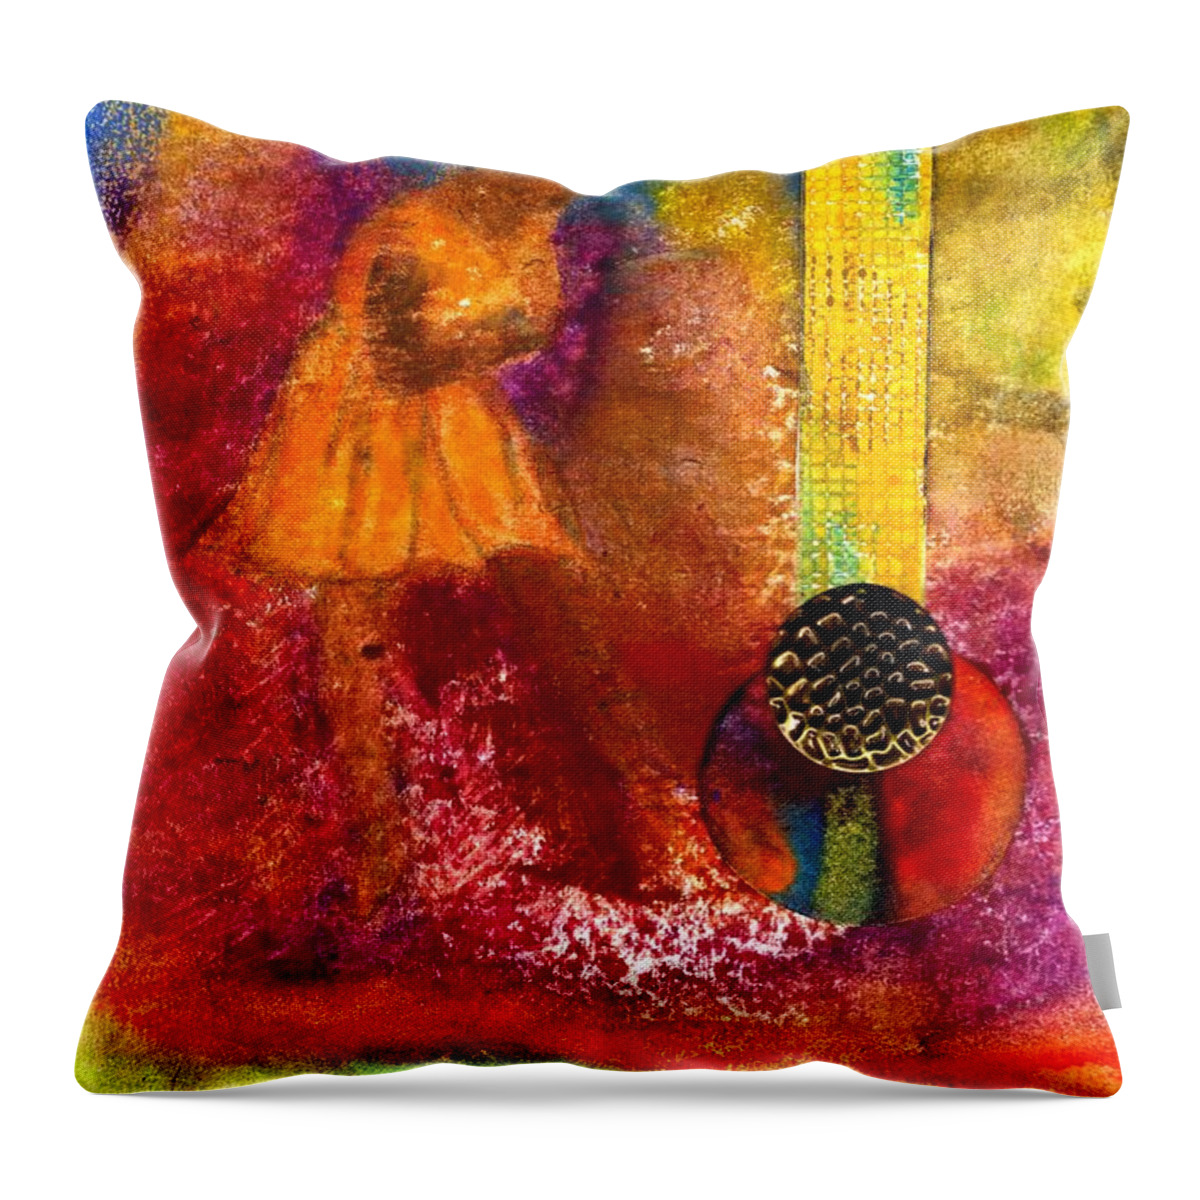 Gretting Cards Throw Pillow featuring the mixed media Imagine Winning by Angela L Walker